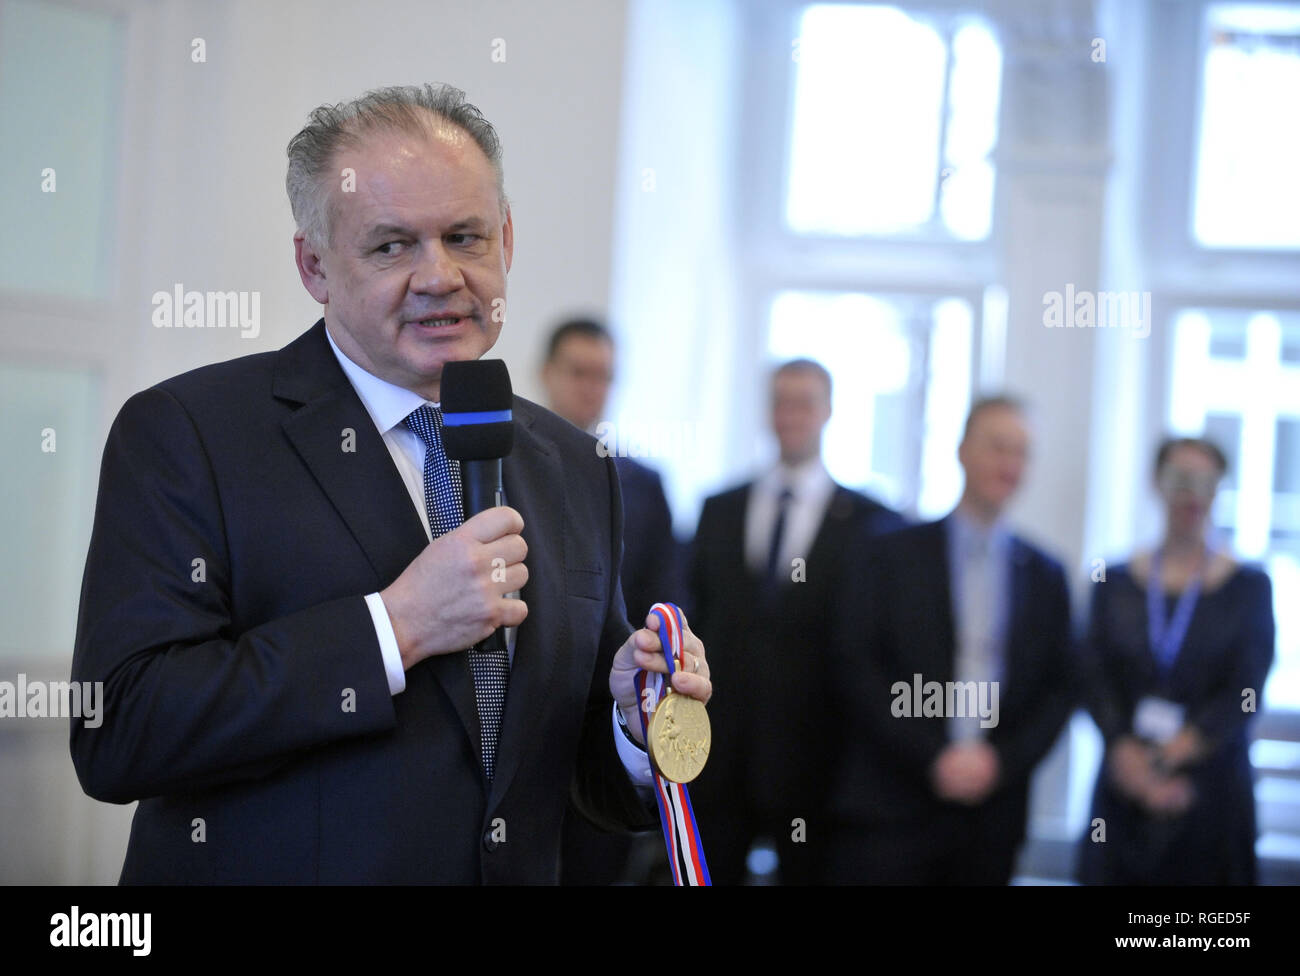 Slovak President Andrej Kiska criticises university financing based on number of students after receiving the Great Gold Medal of Brno's Masaryk University on the 100th anniversary of its establishment during the debate with students in Brno, Czech Republic, January 29, 2019. (CTK Photo/Igor Zehl) Stock Photo